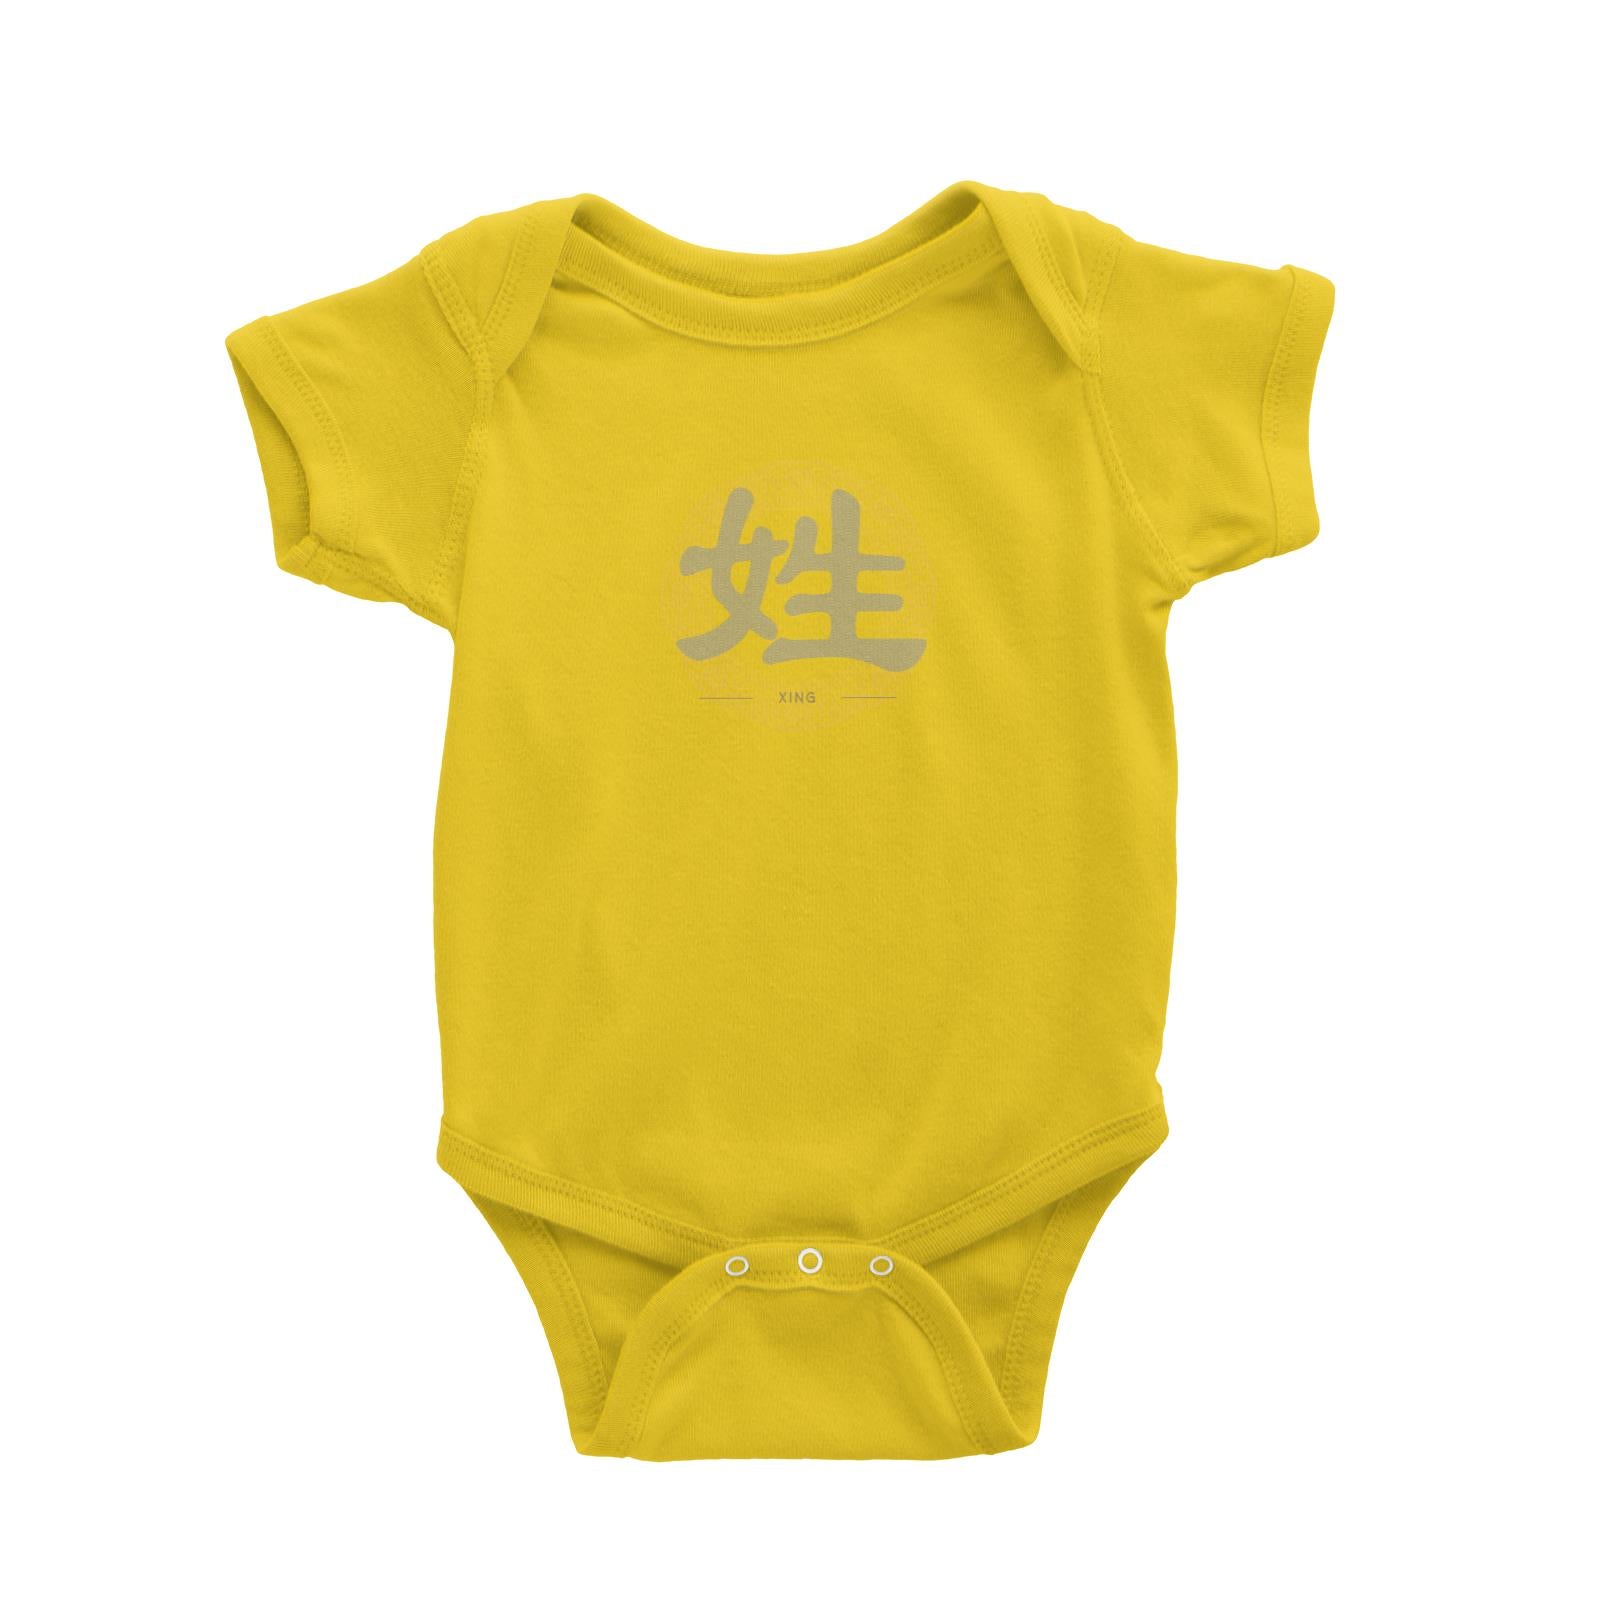 Chinese New Year Patterned Surname with Floral Emblem Baby Romper  Personalizable Designs